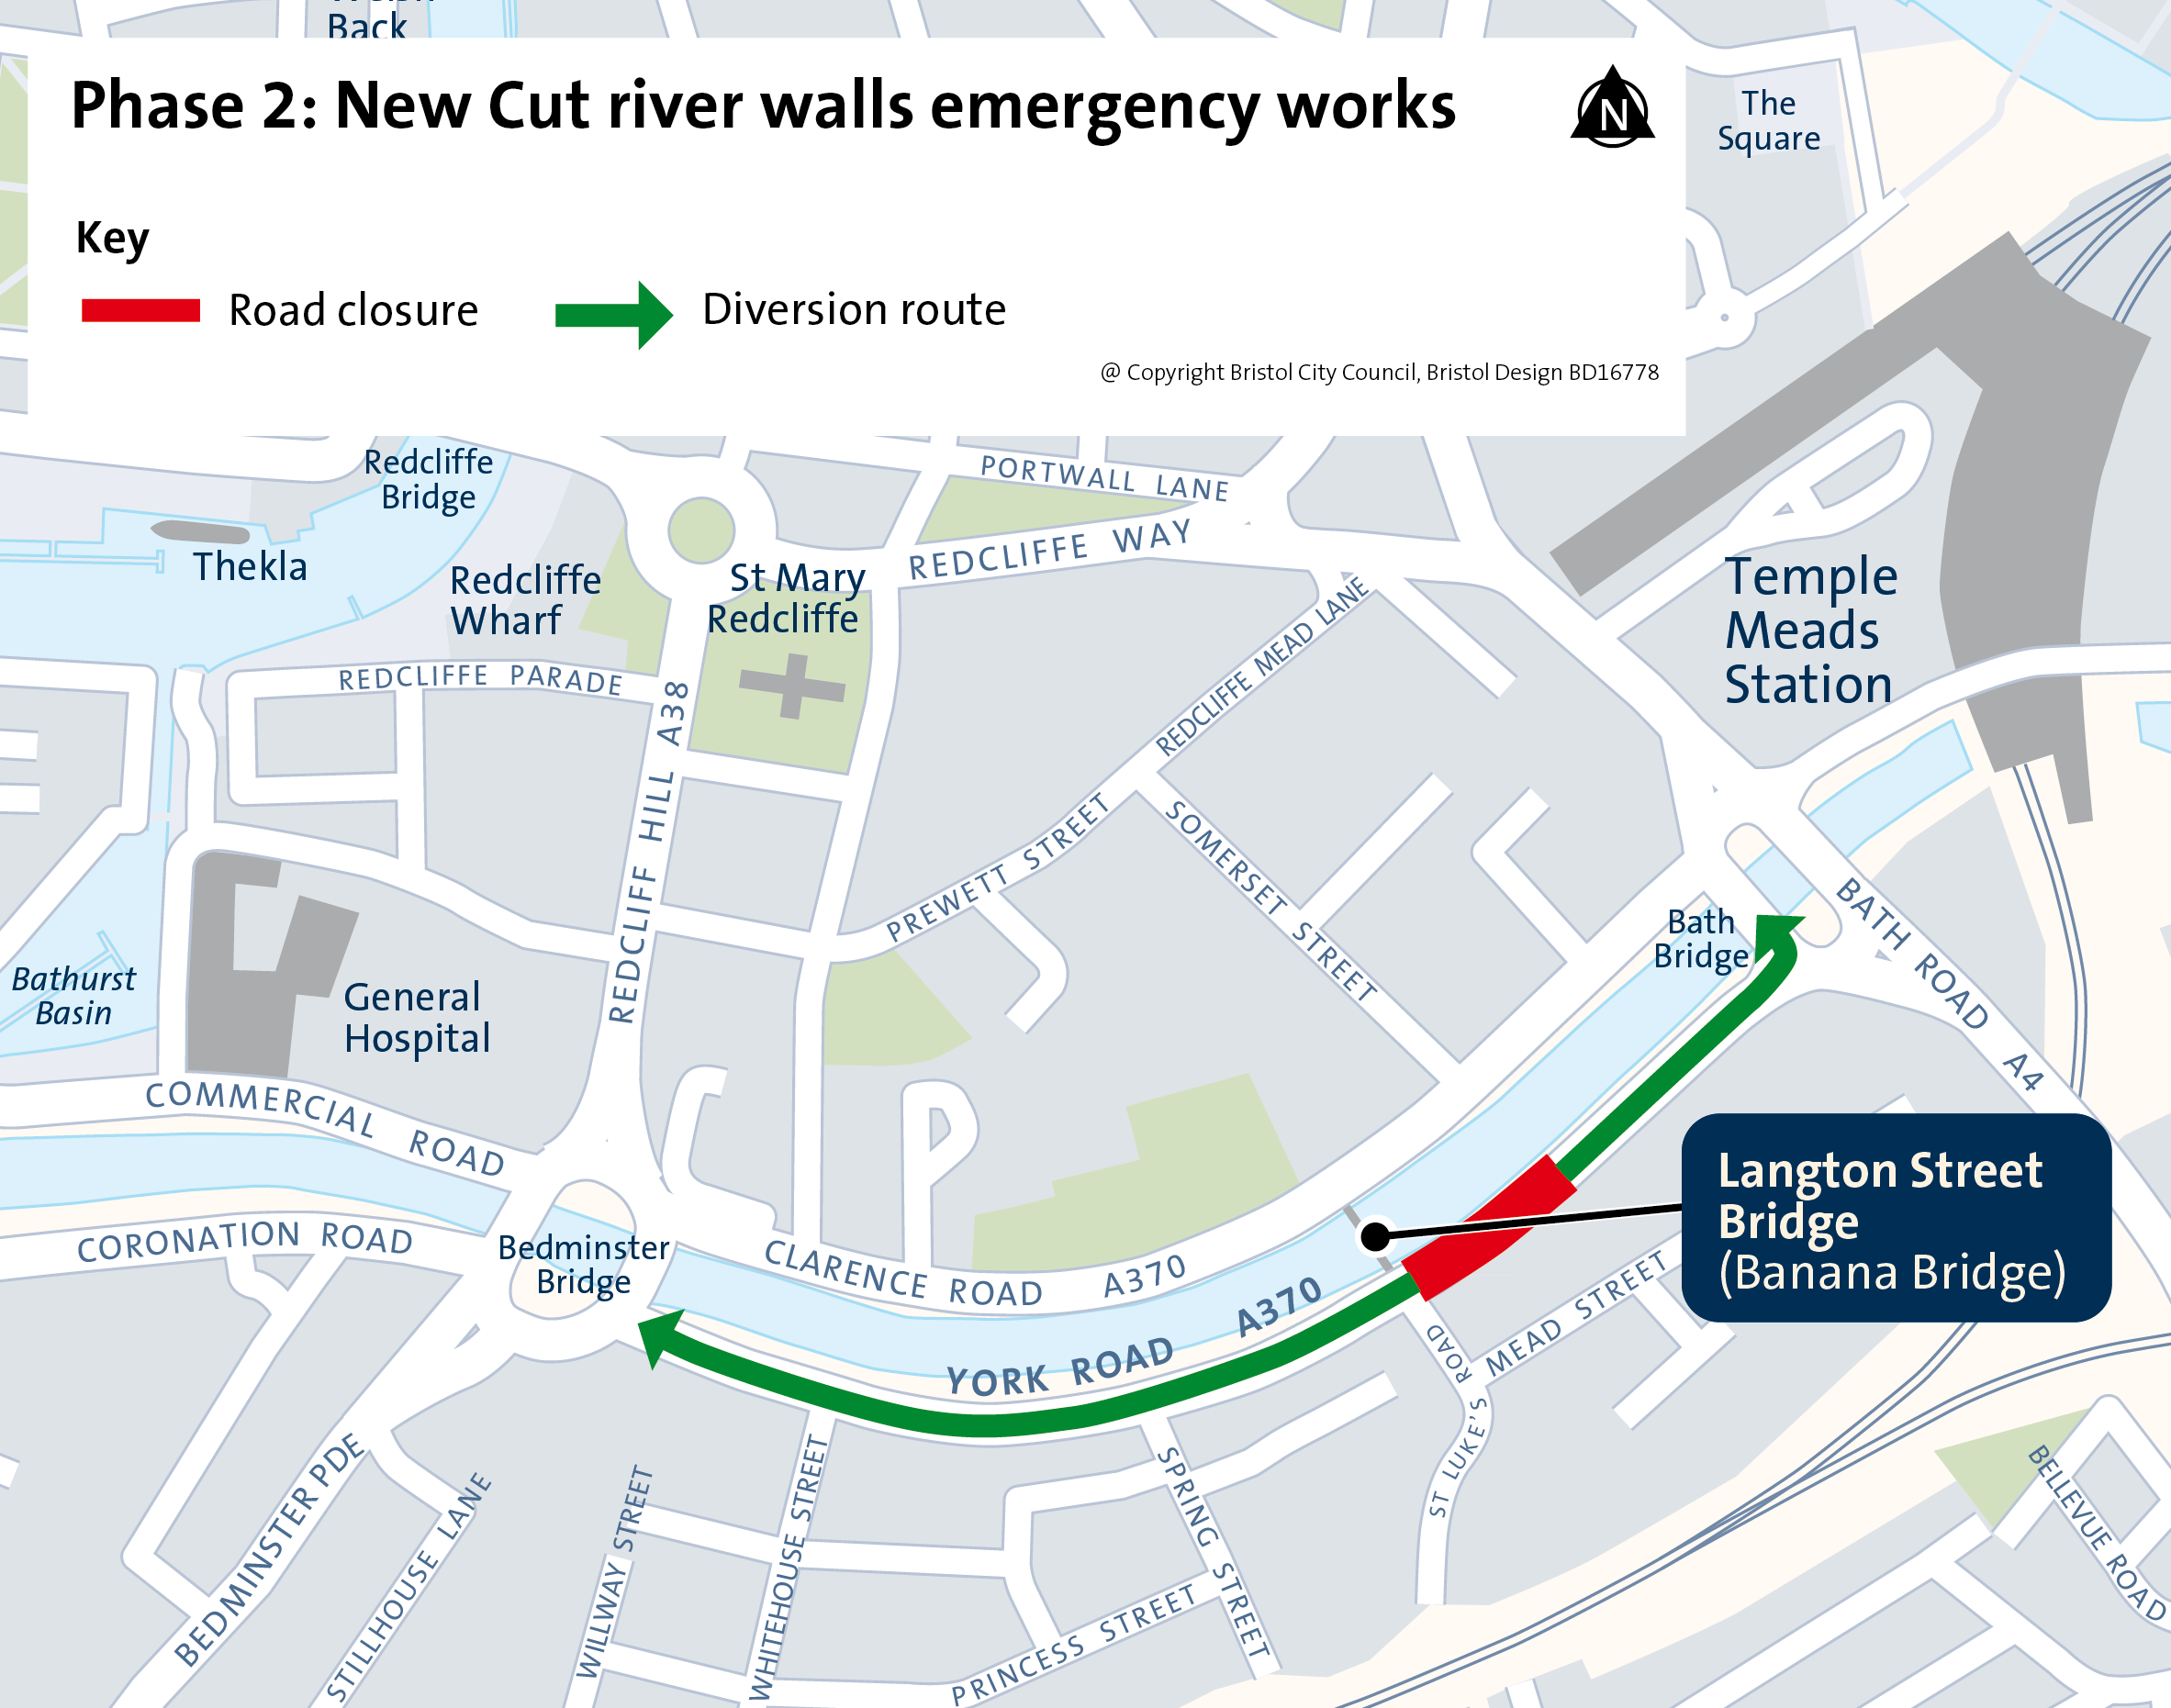 Phase 2 New Cut Diversions